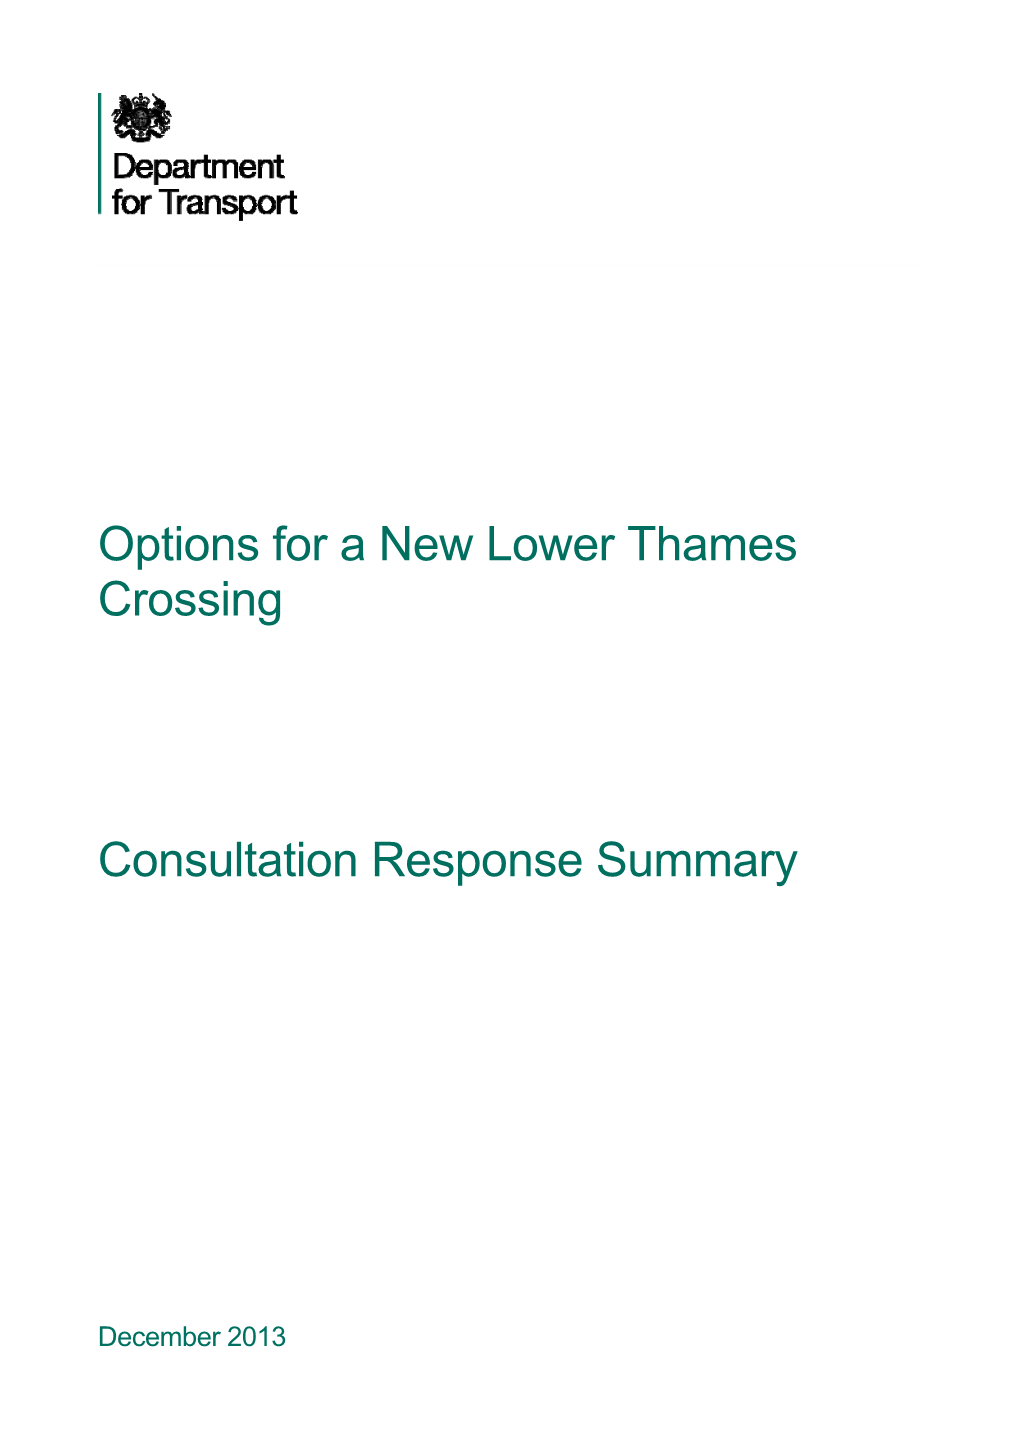 Options for a New Lower Thames Crossing